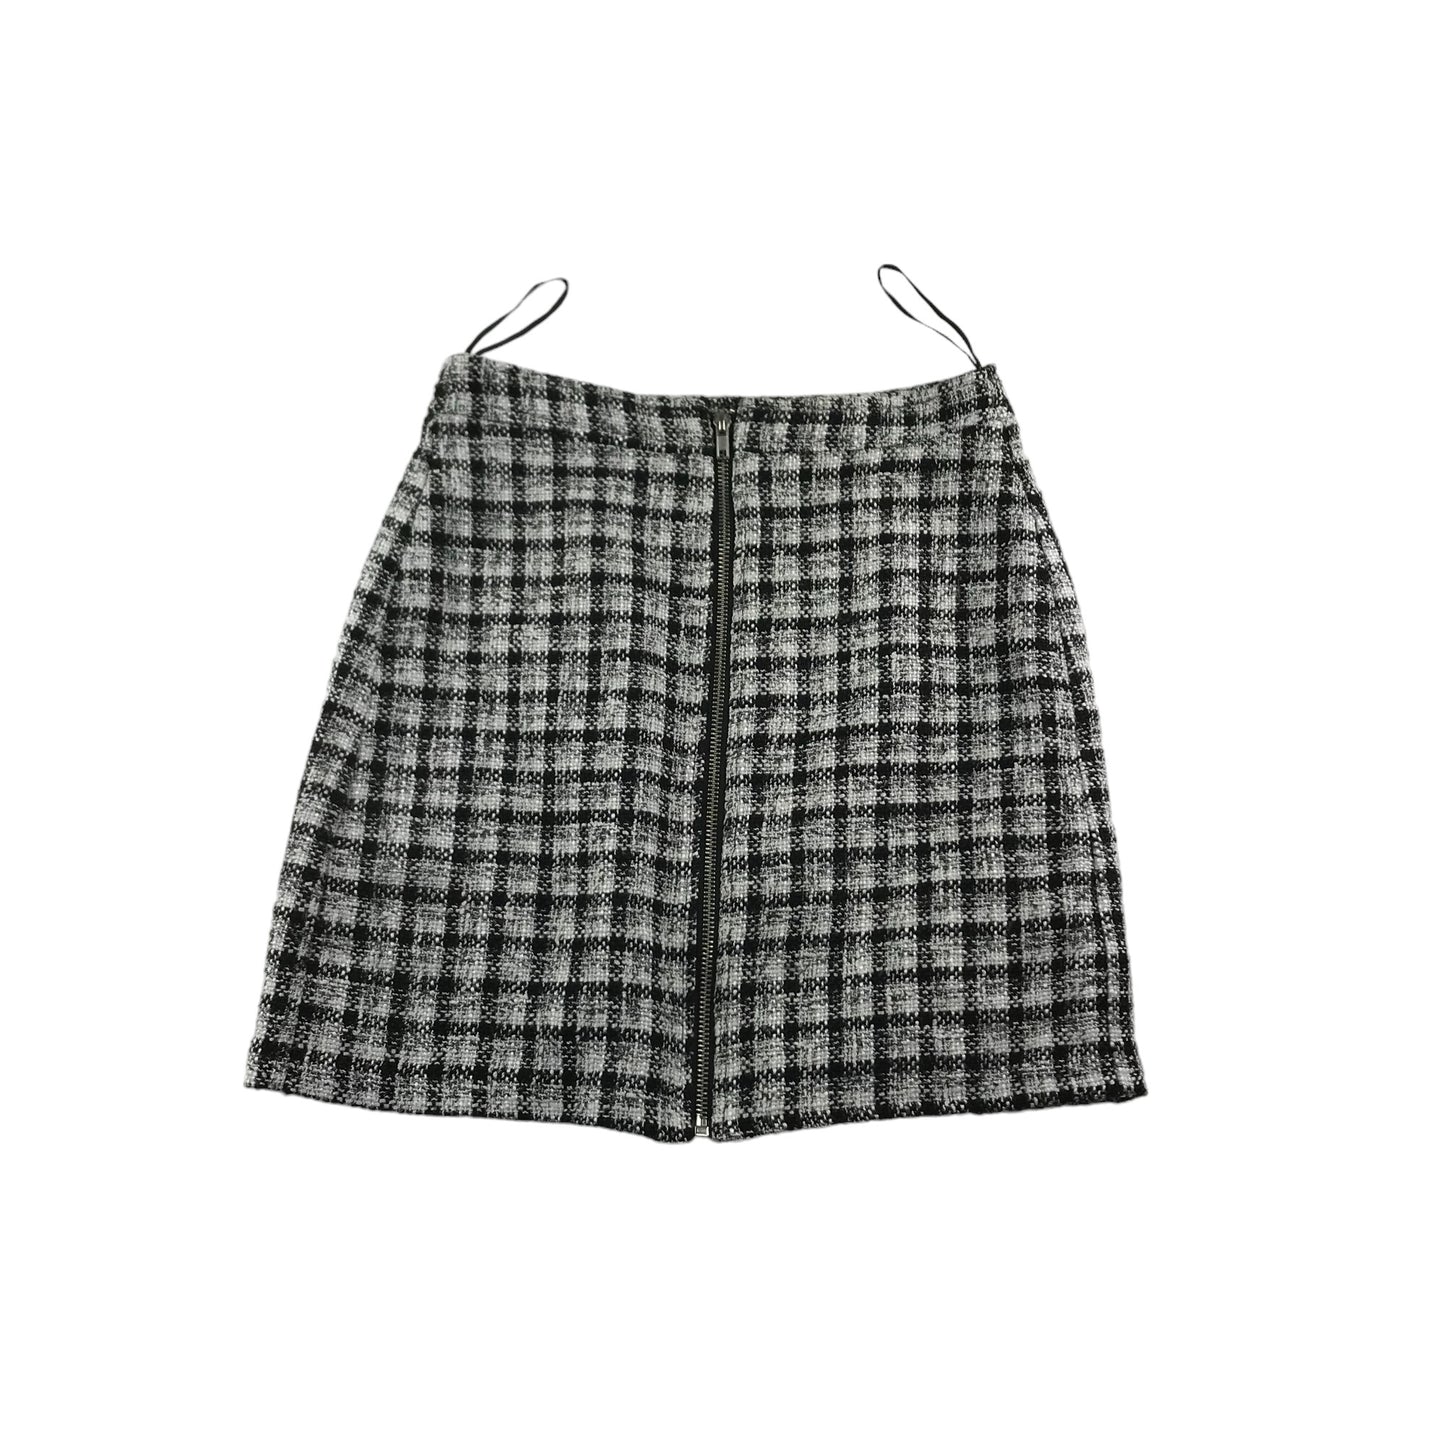 New Look Shorts Women's Size 8 Black and White Checked